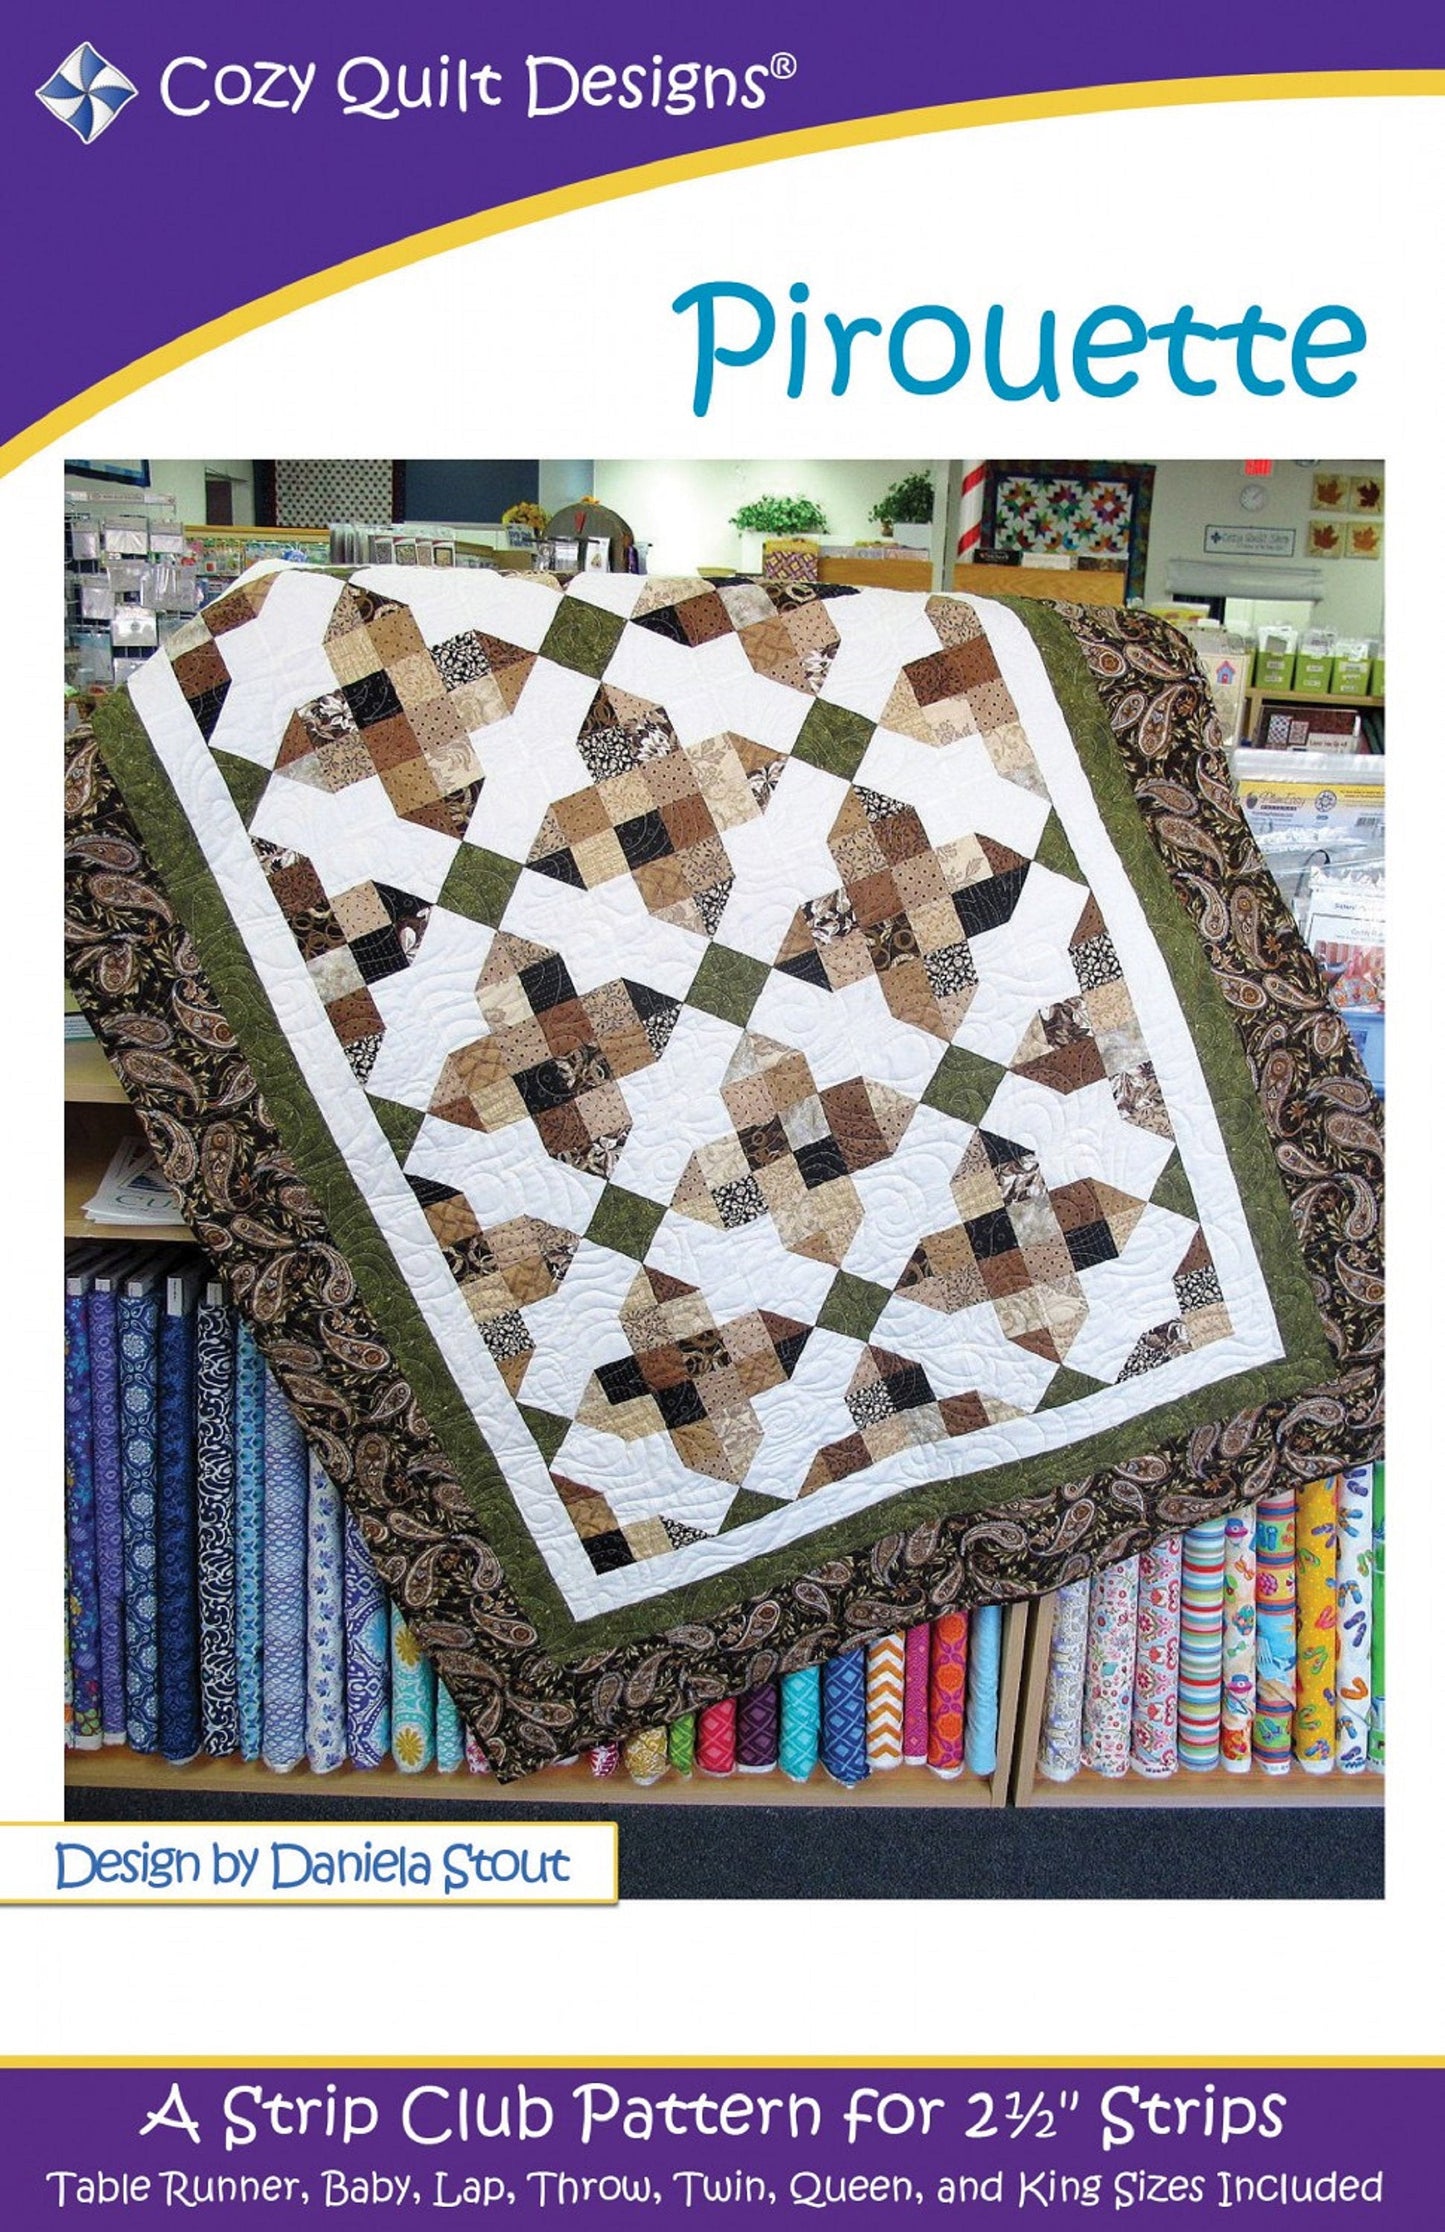 Pirouette Quilt Pattern by Cozy Quilt Designs